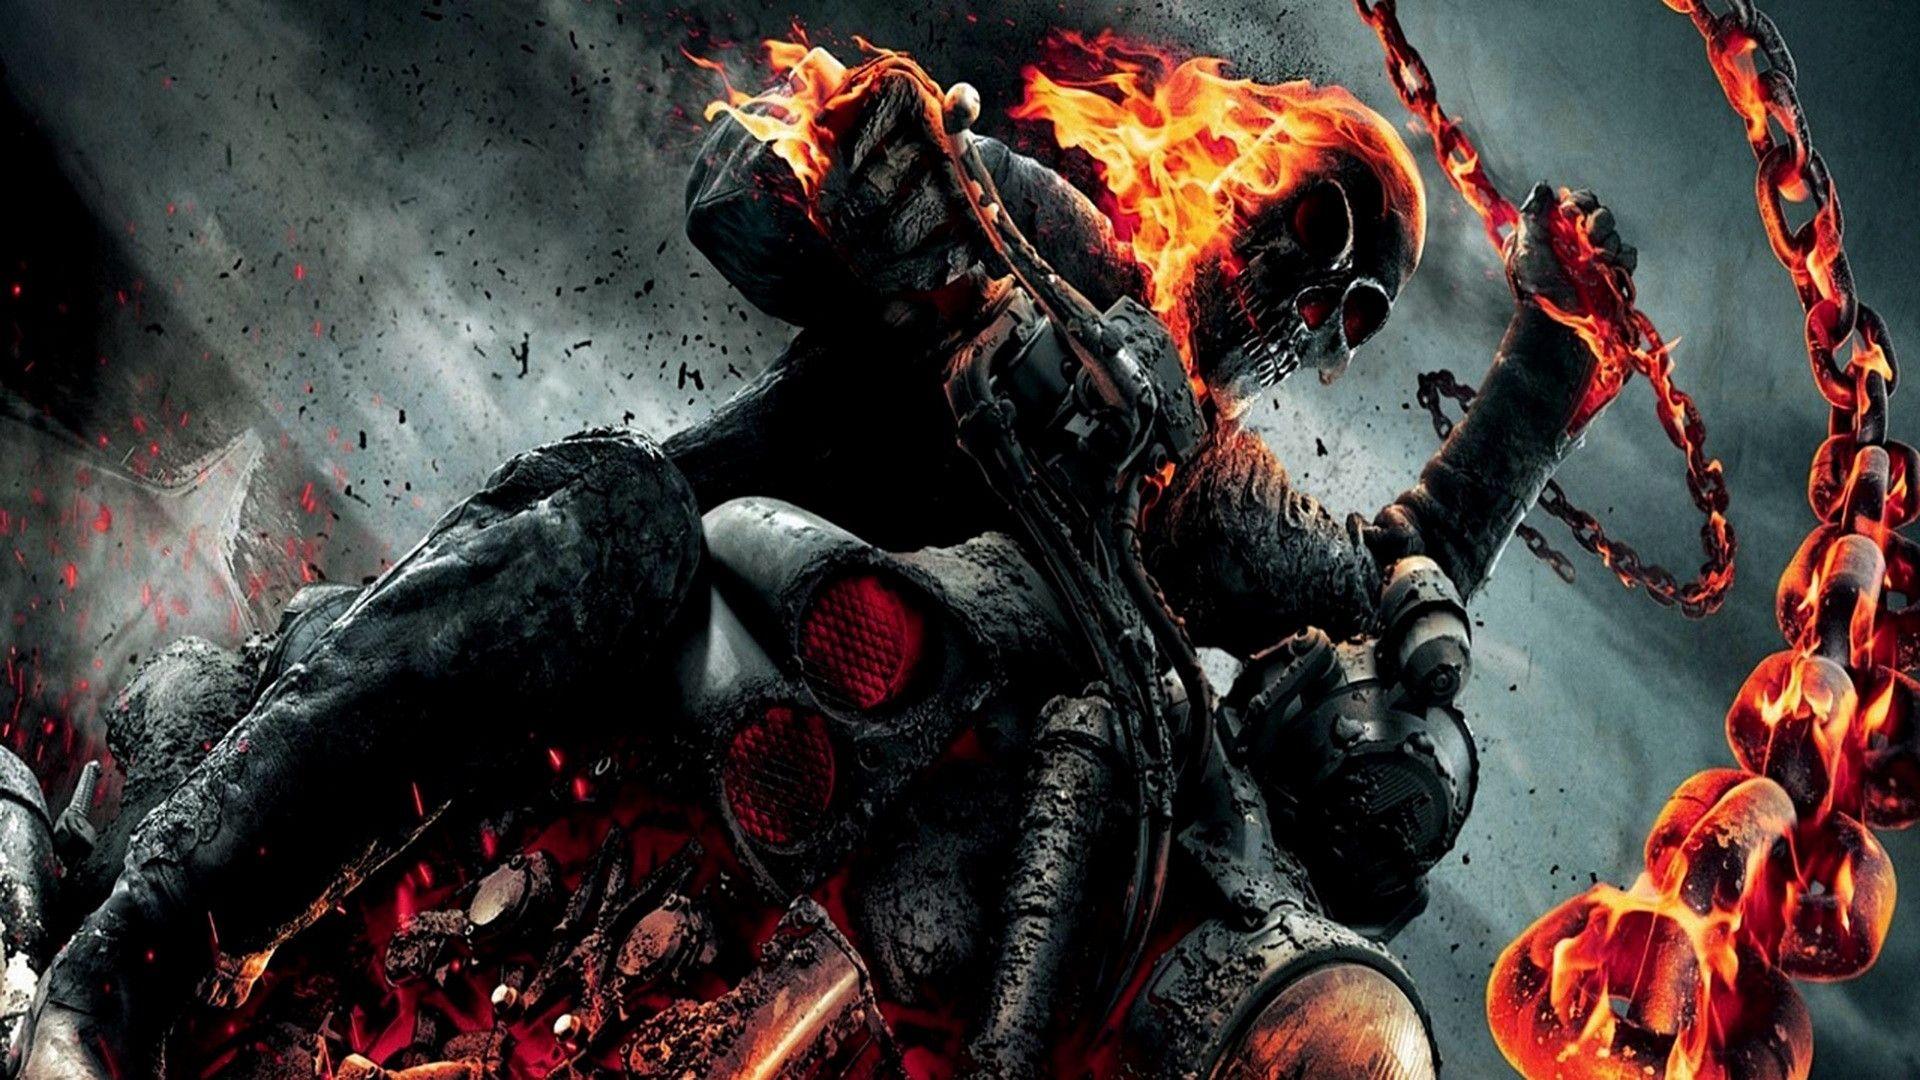 Ghost Rider 2 Wallpaper background picture